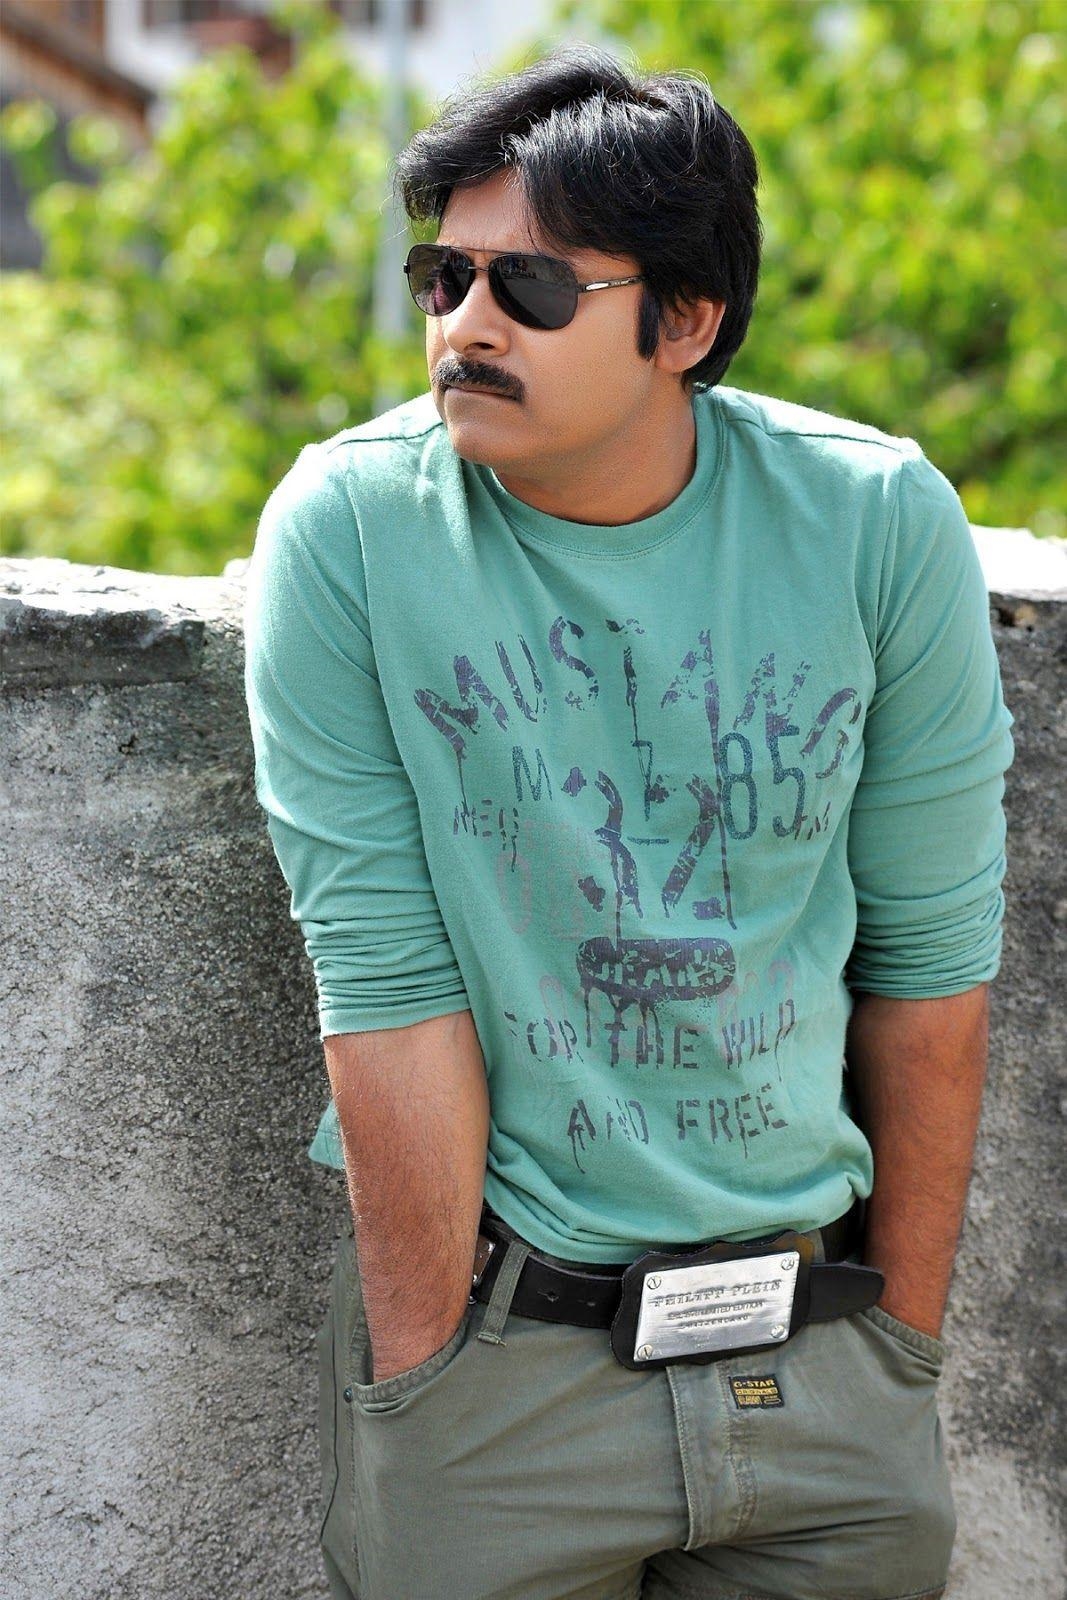 Power Star Pawan Kalyan HD Images From Archives